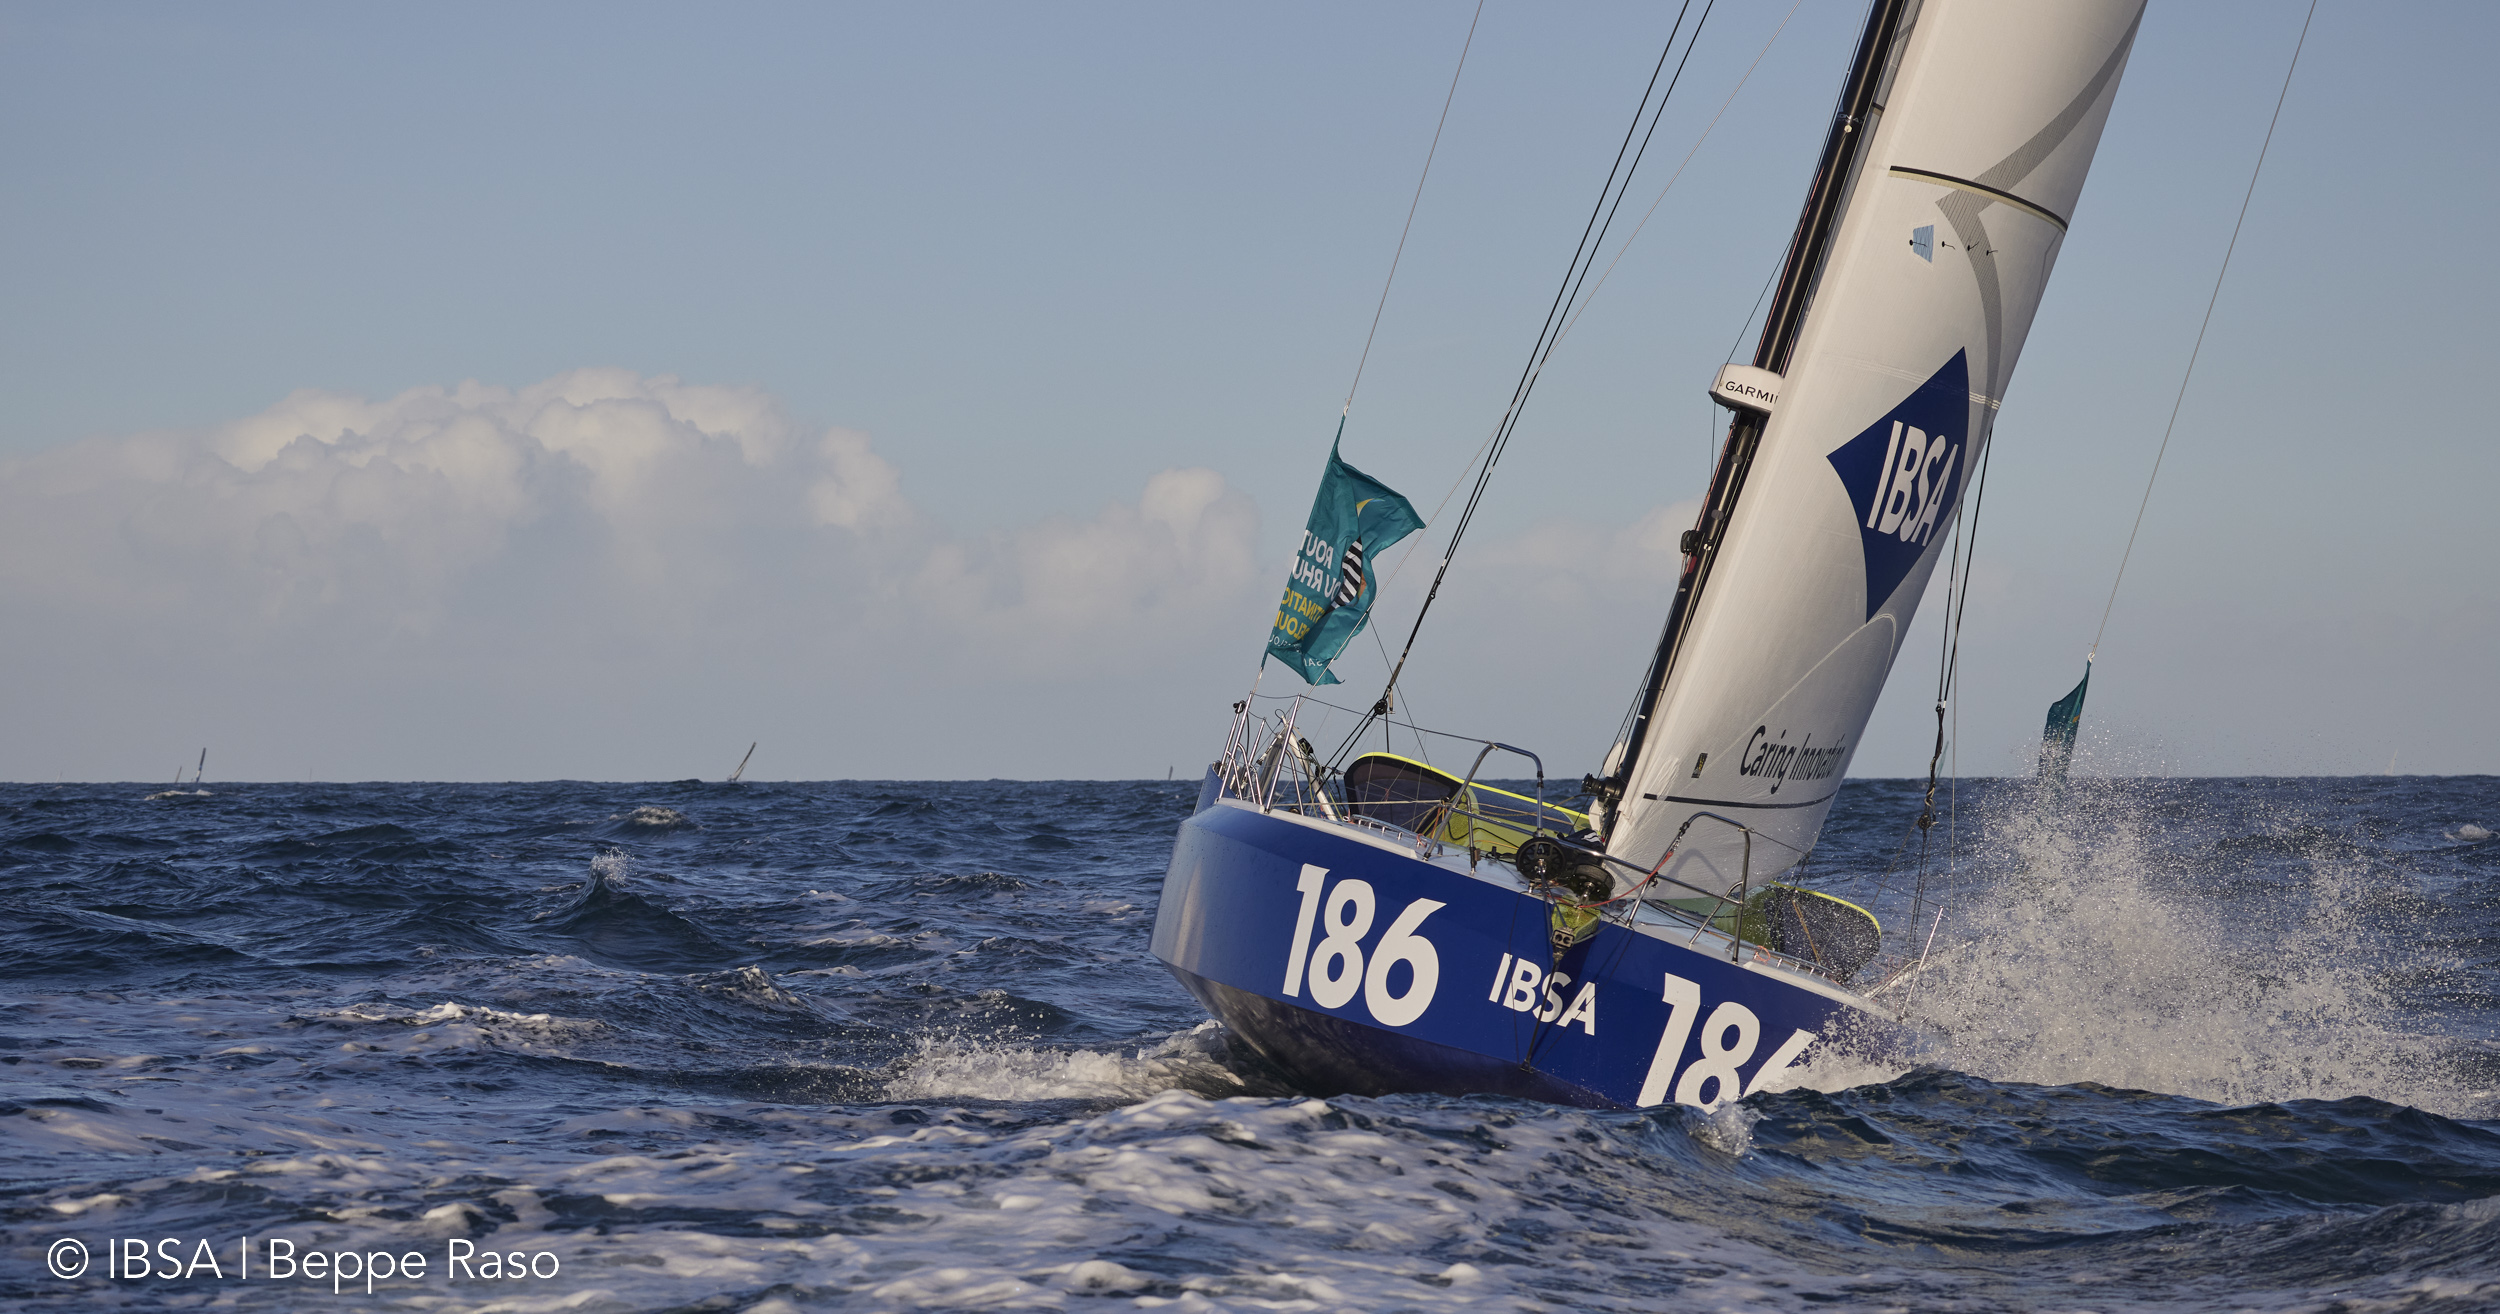 Alberto Bona and the Class40 IBSA set sail for the Route du Rhum